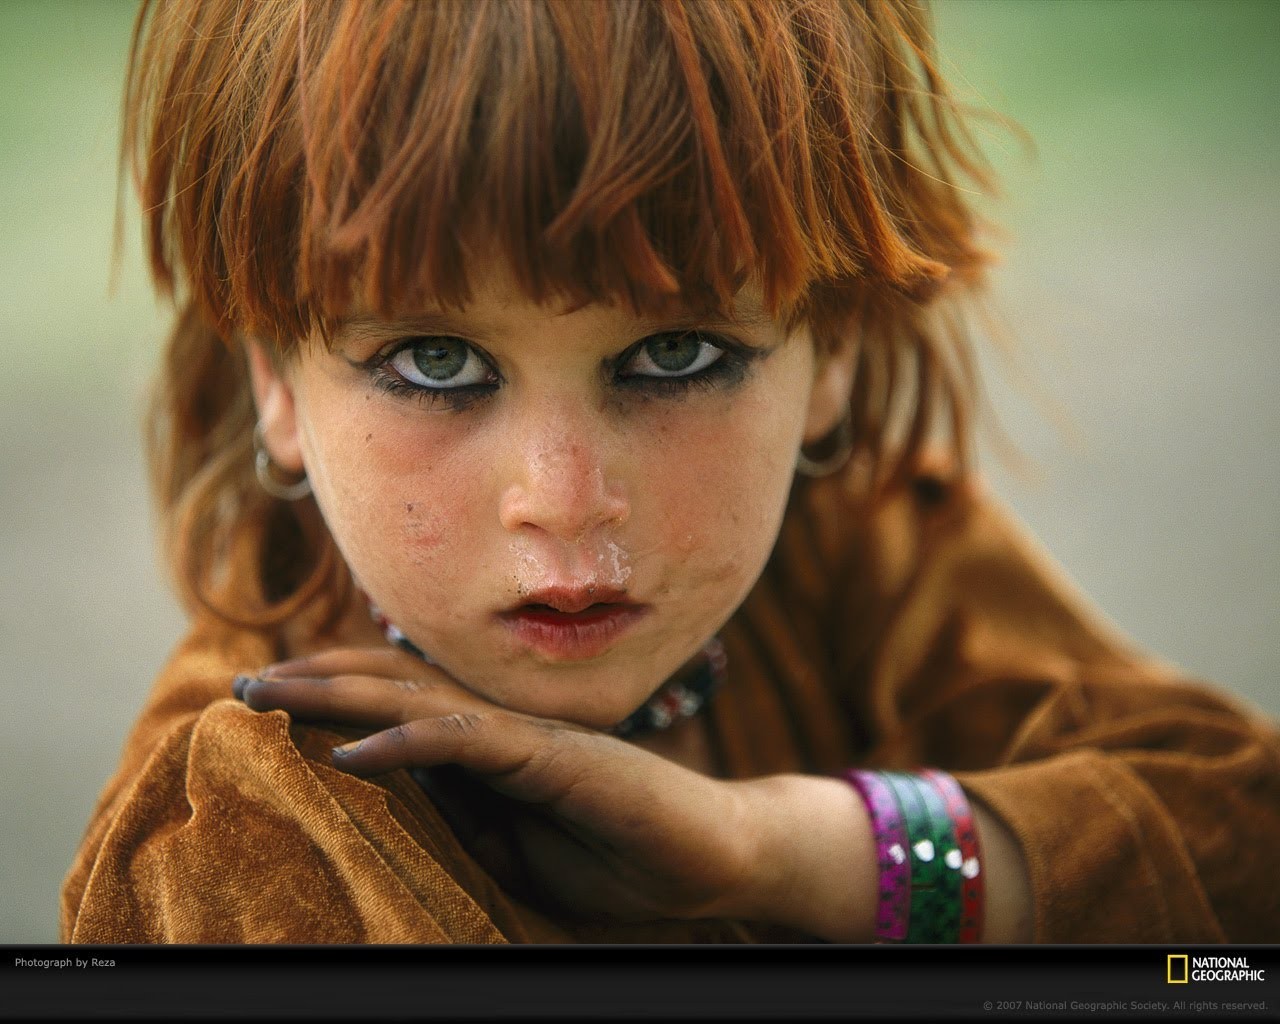 People 1280x1024 bangles green eyes bangs Steve McCurry redhead closeup children watermarked 2007 (Year) bracelets National Geographic face looking at viewer dirty